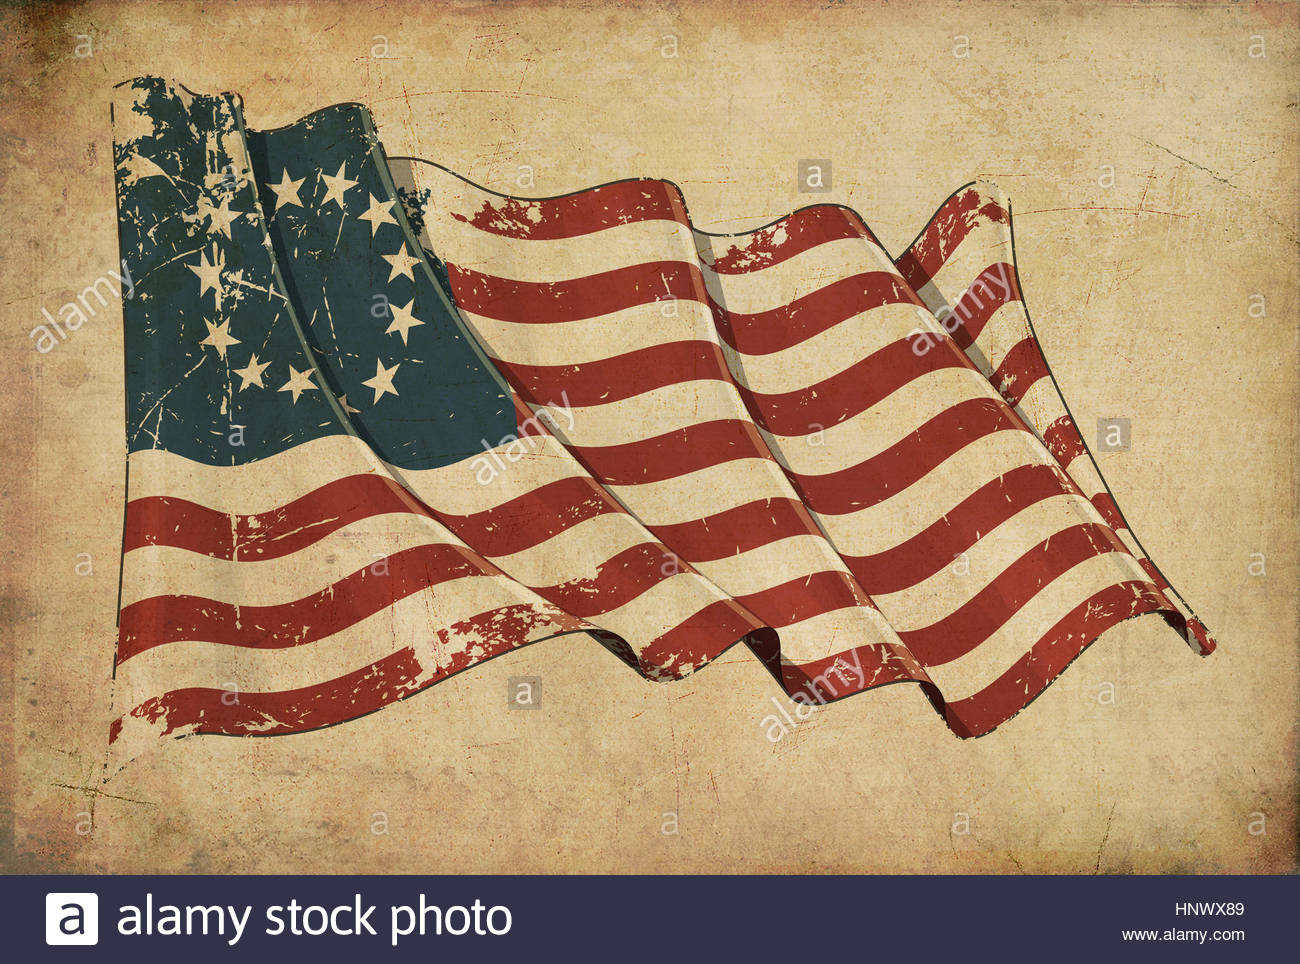 Wallpaper Depicting An Aged Paper Textured Background With A